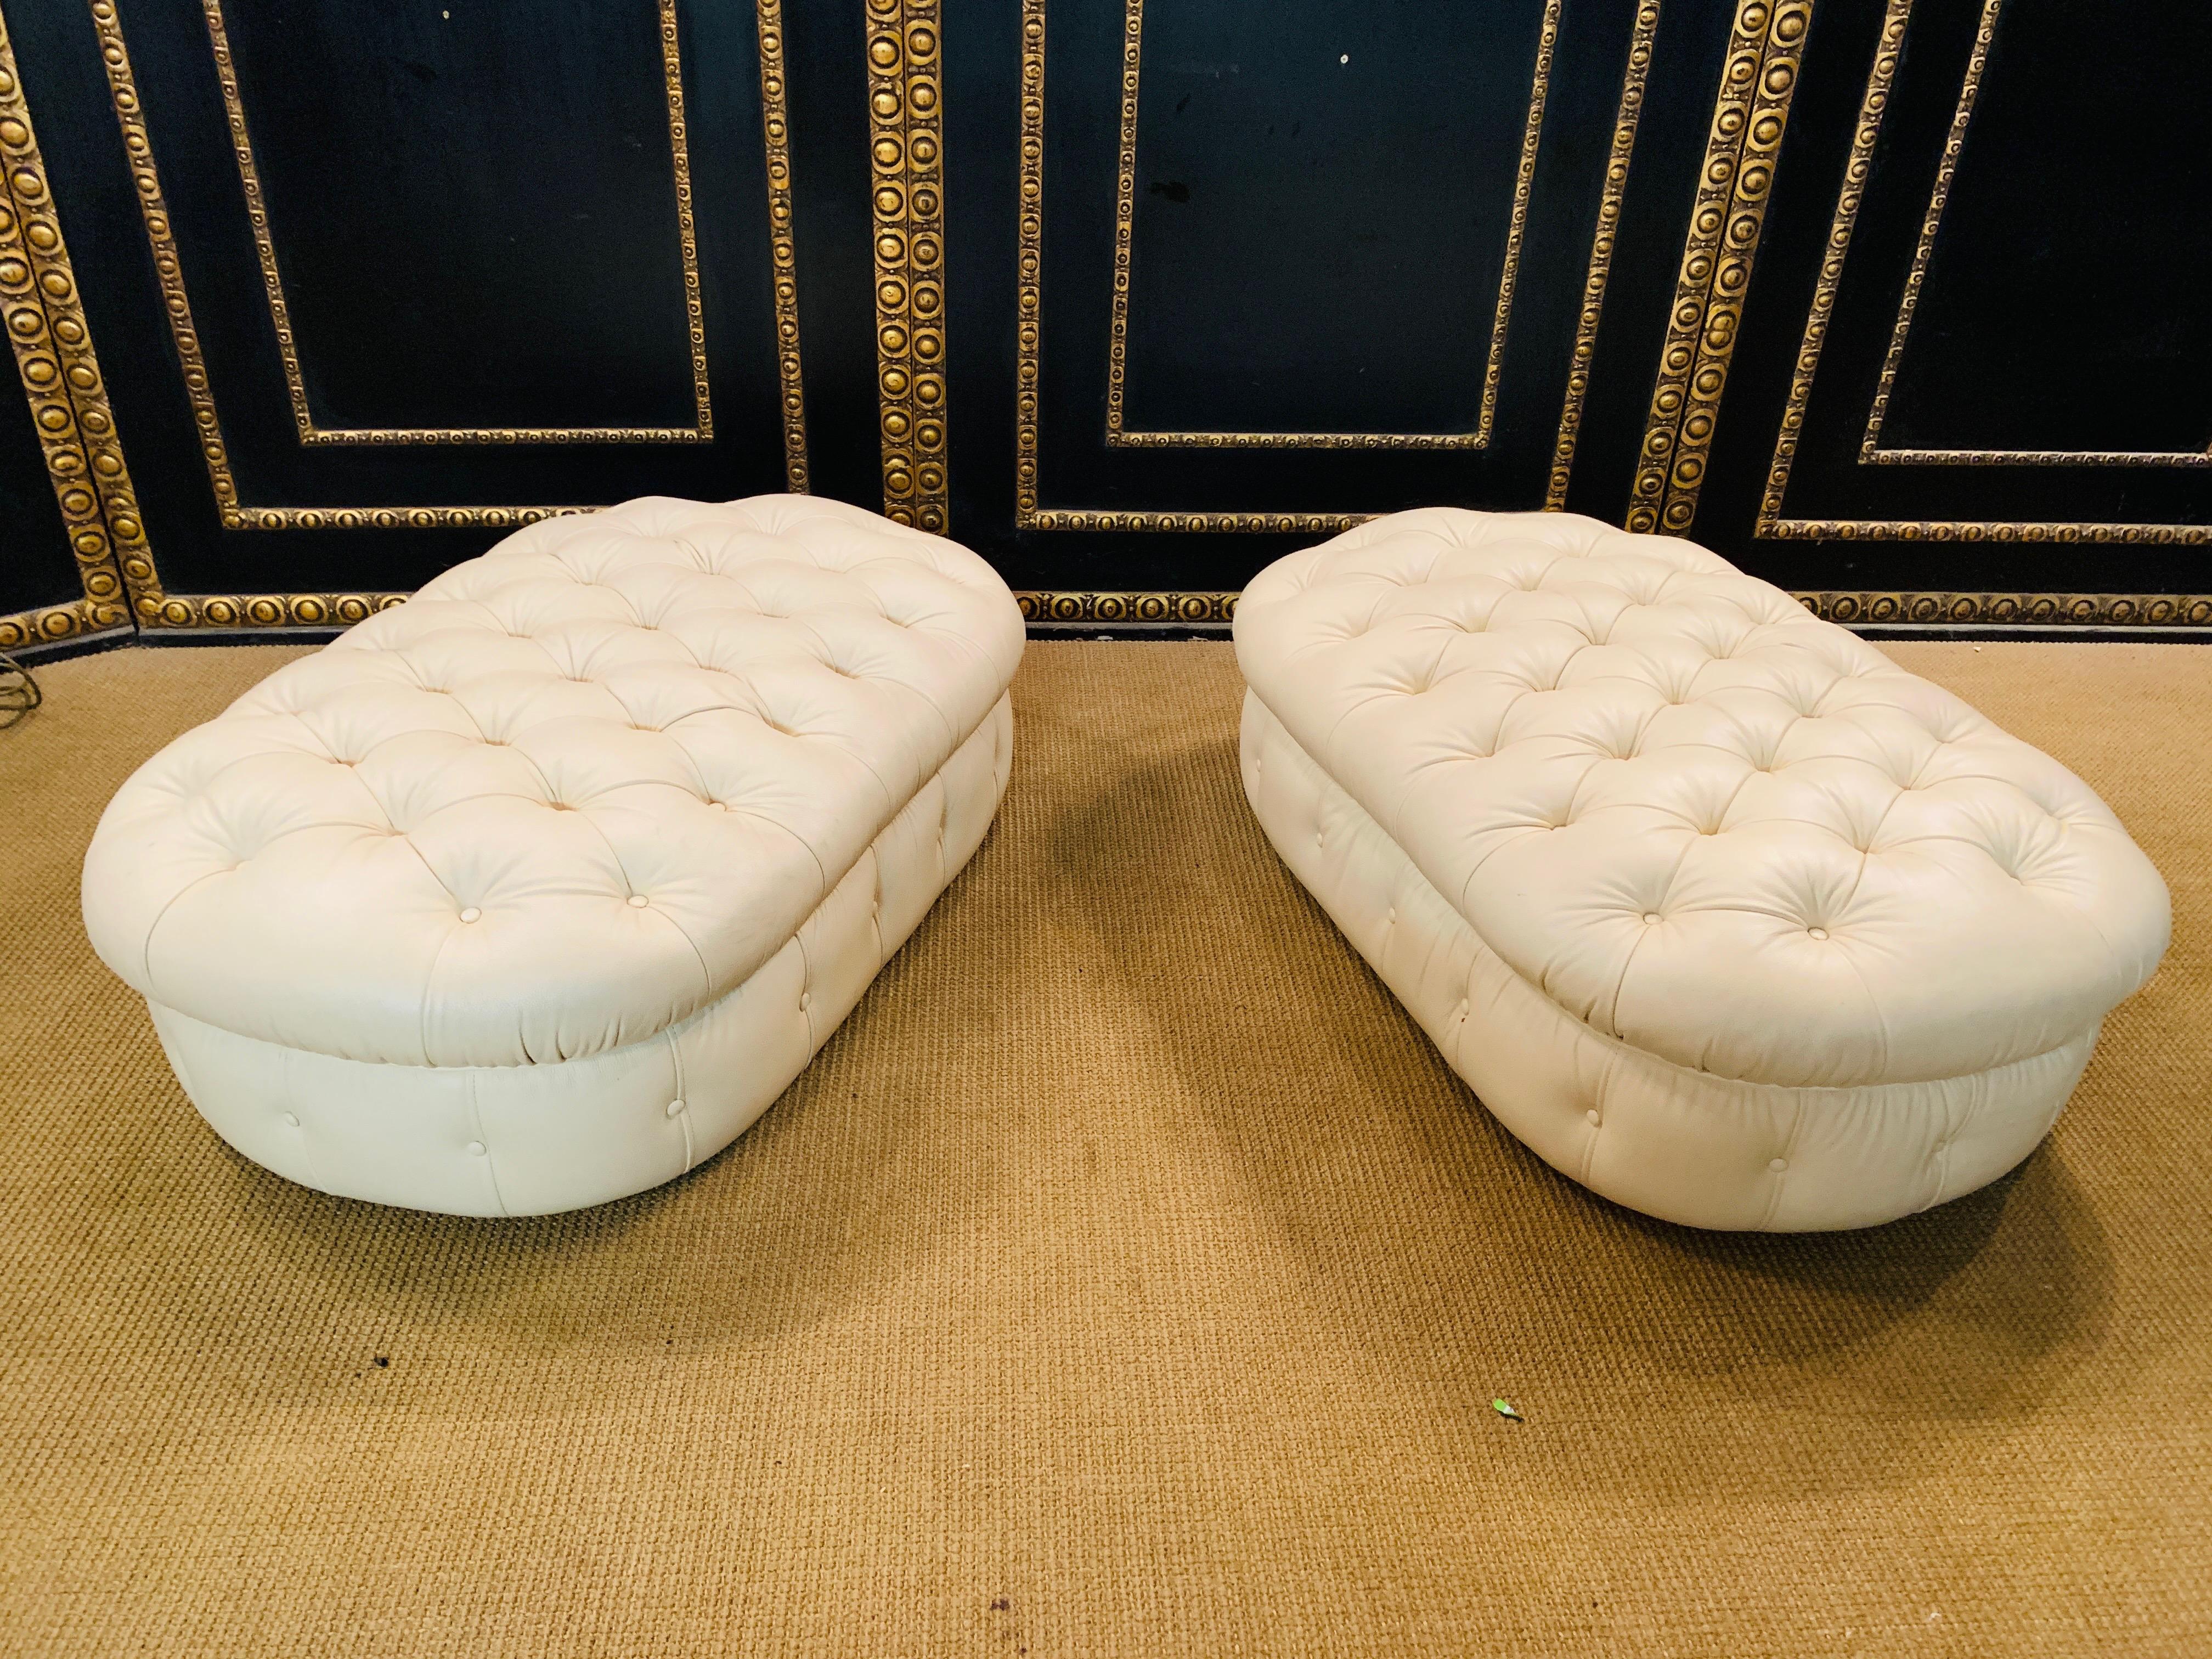 2 beautiful Chesterfield stools in beige leather oval shape.
Made in Italy.